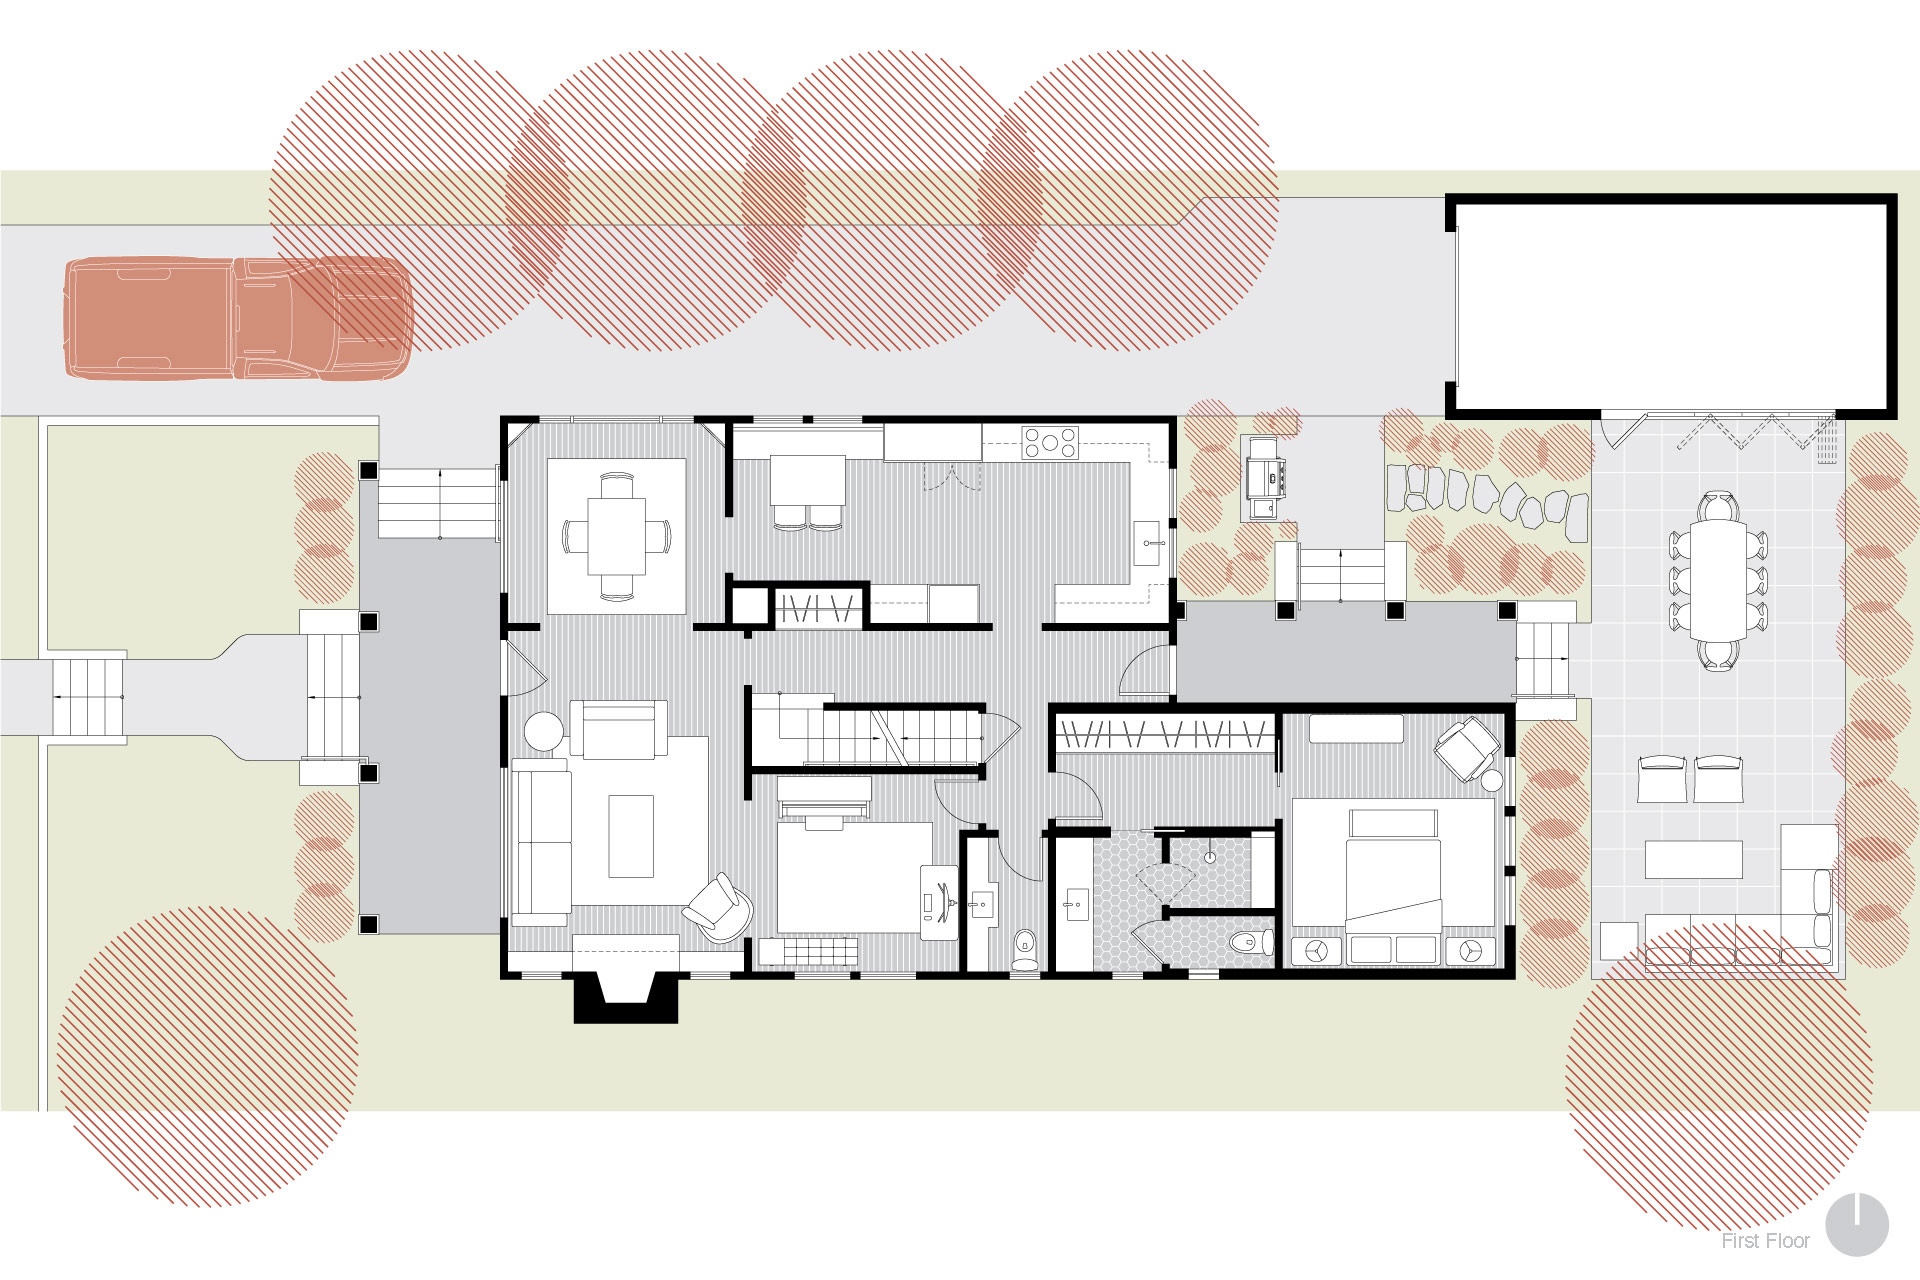 This is a plan drawing of the renovated first floor at the Alameda Craftsman.